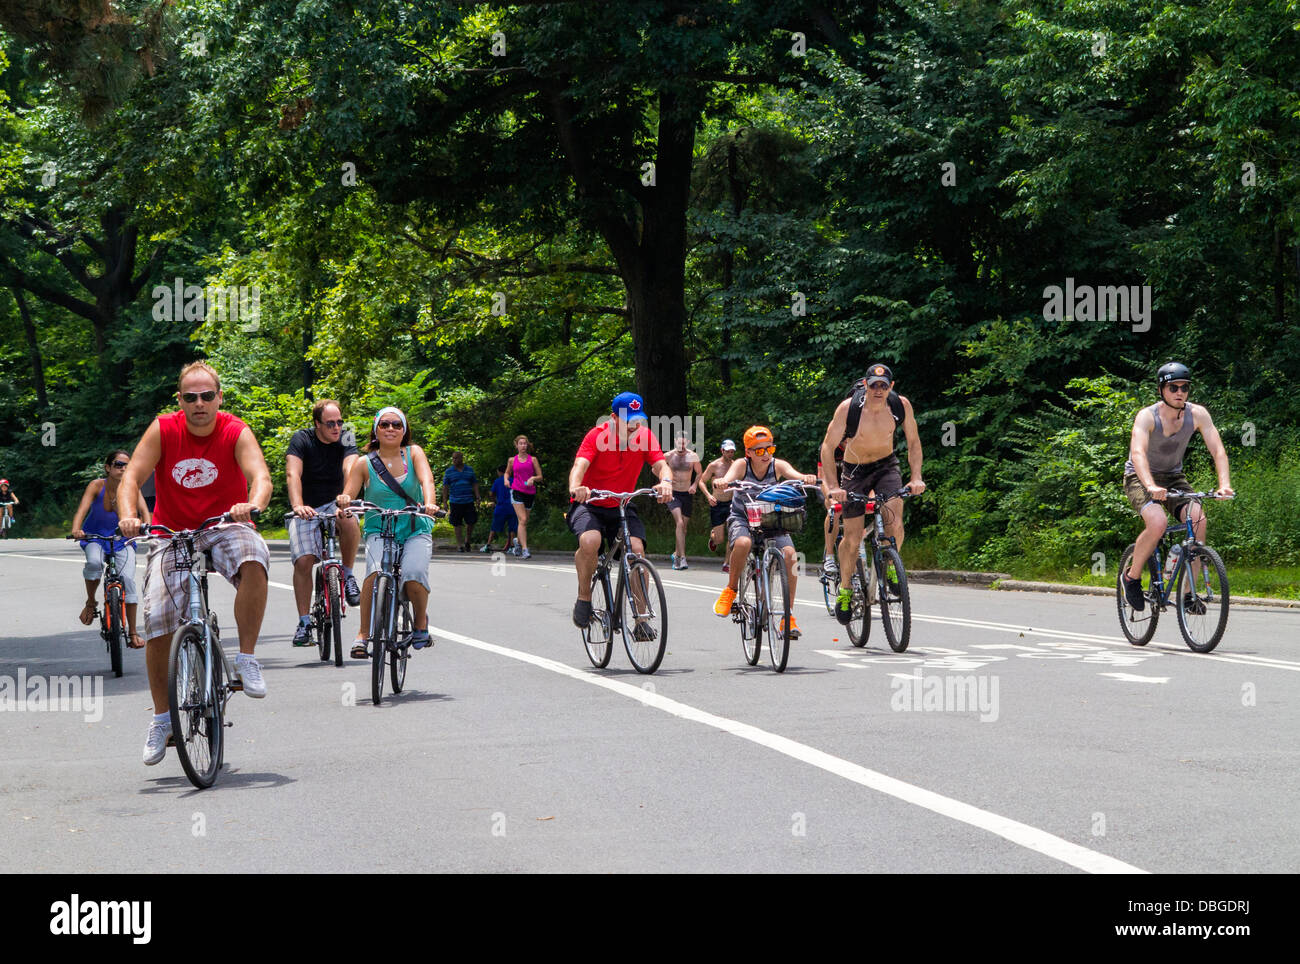 Cyclists. People cycling in Central Park, New York City Stock Photo